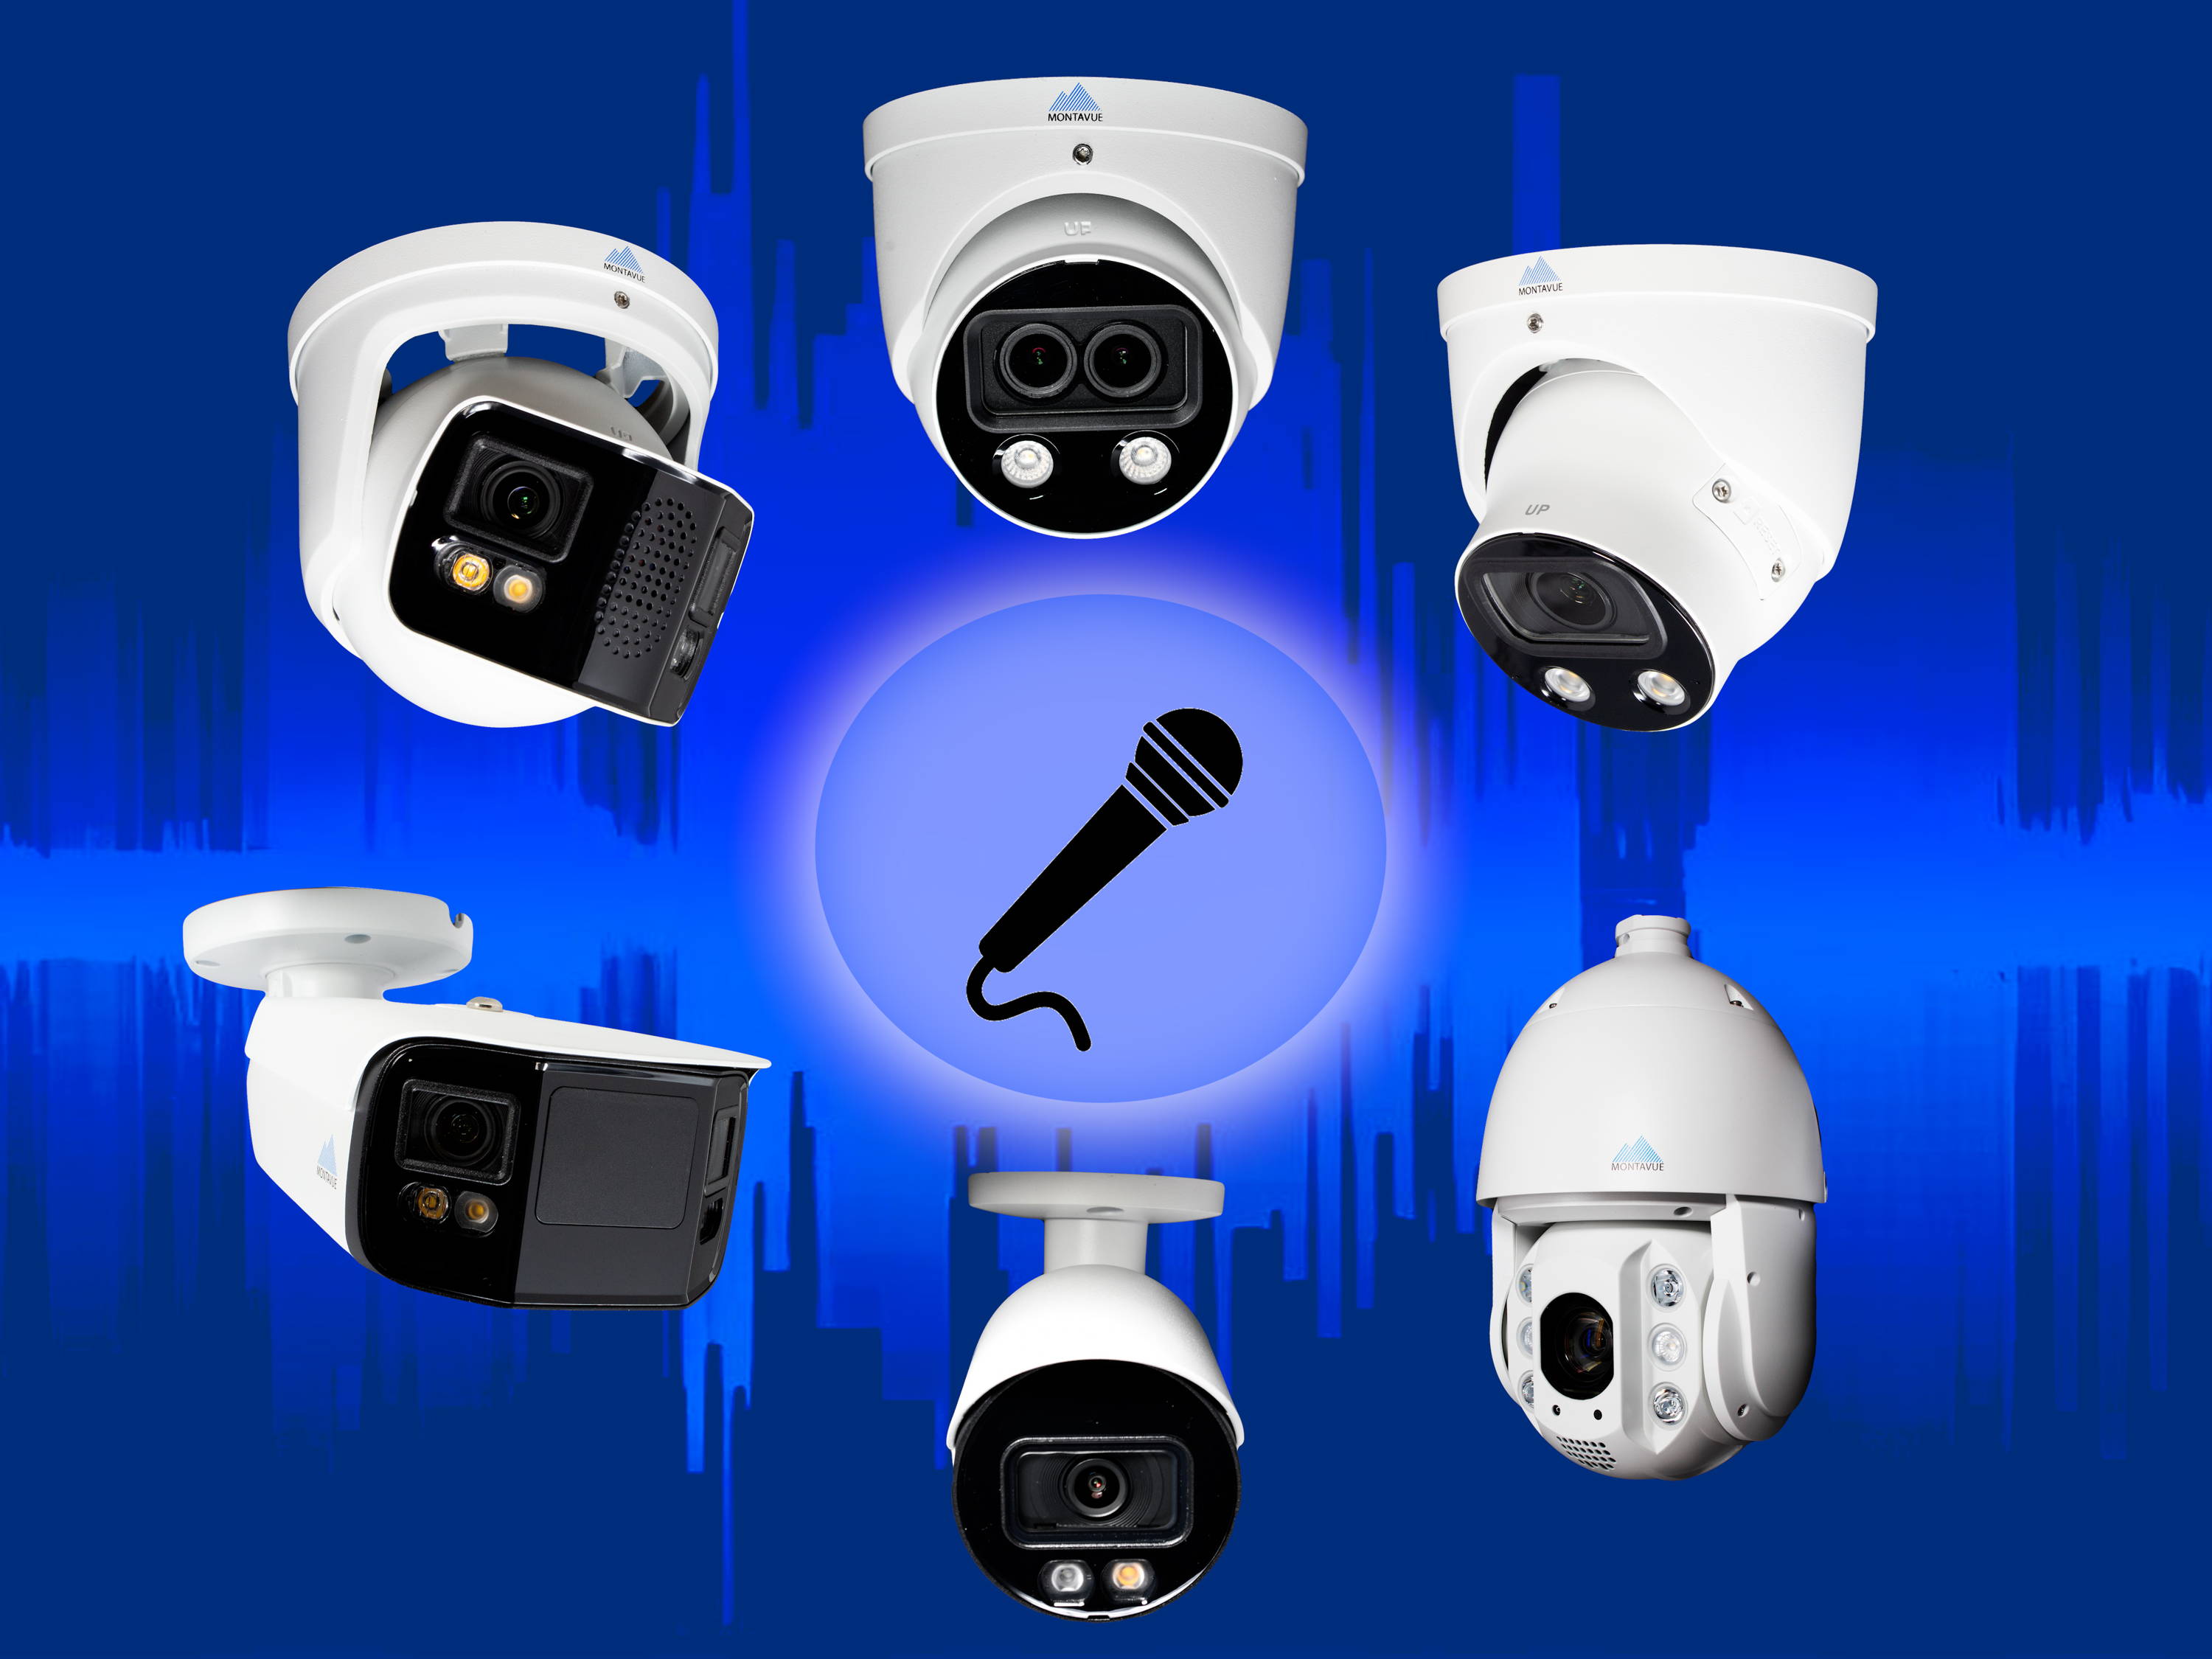 Security IP cameras with built-in microphones for audio